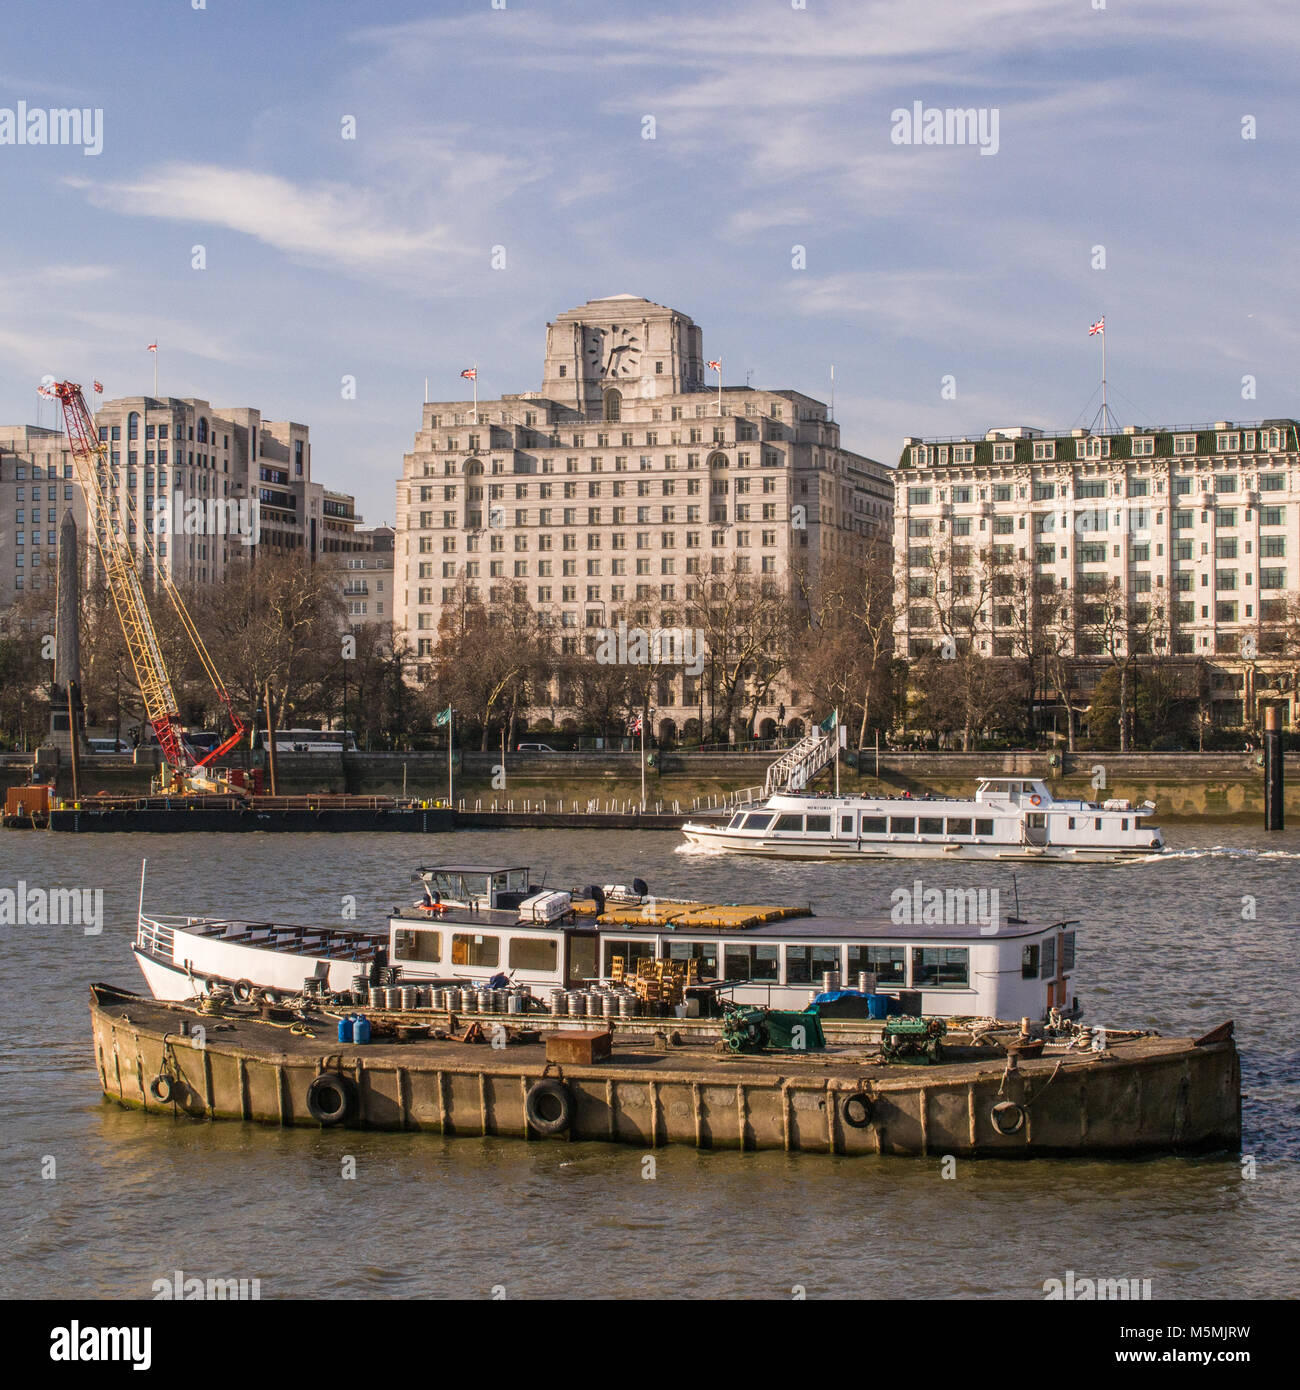 Looking Northwards across the Rver Thames from the Southbank between the Hungerford and Waterloo bridges Stock Photo